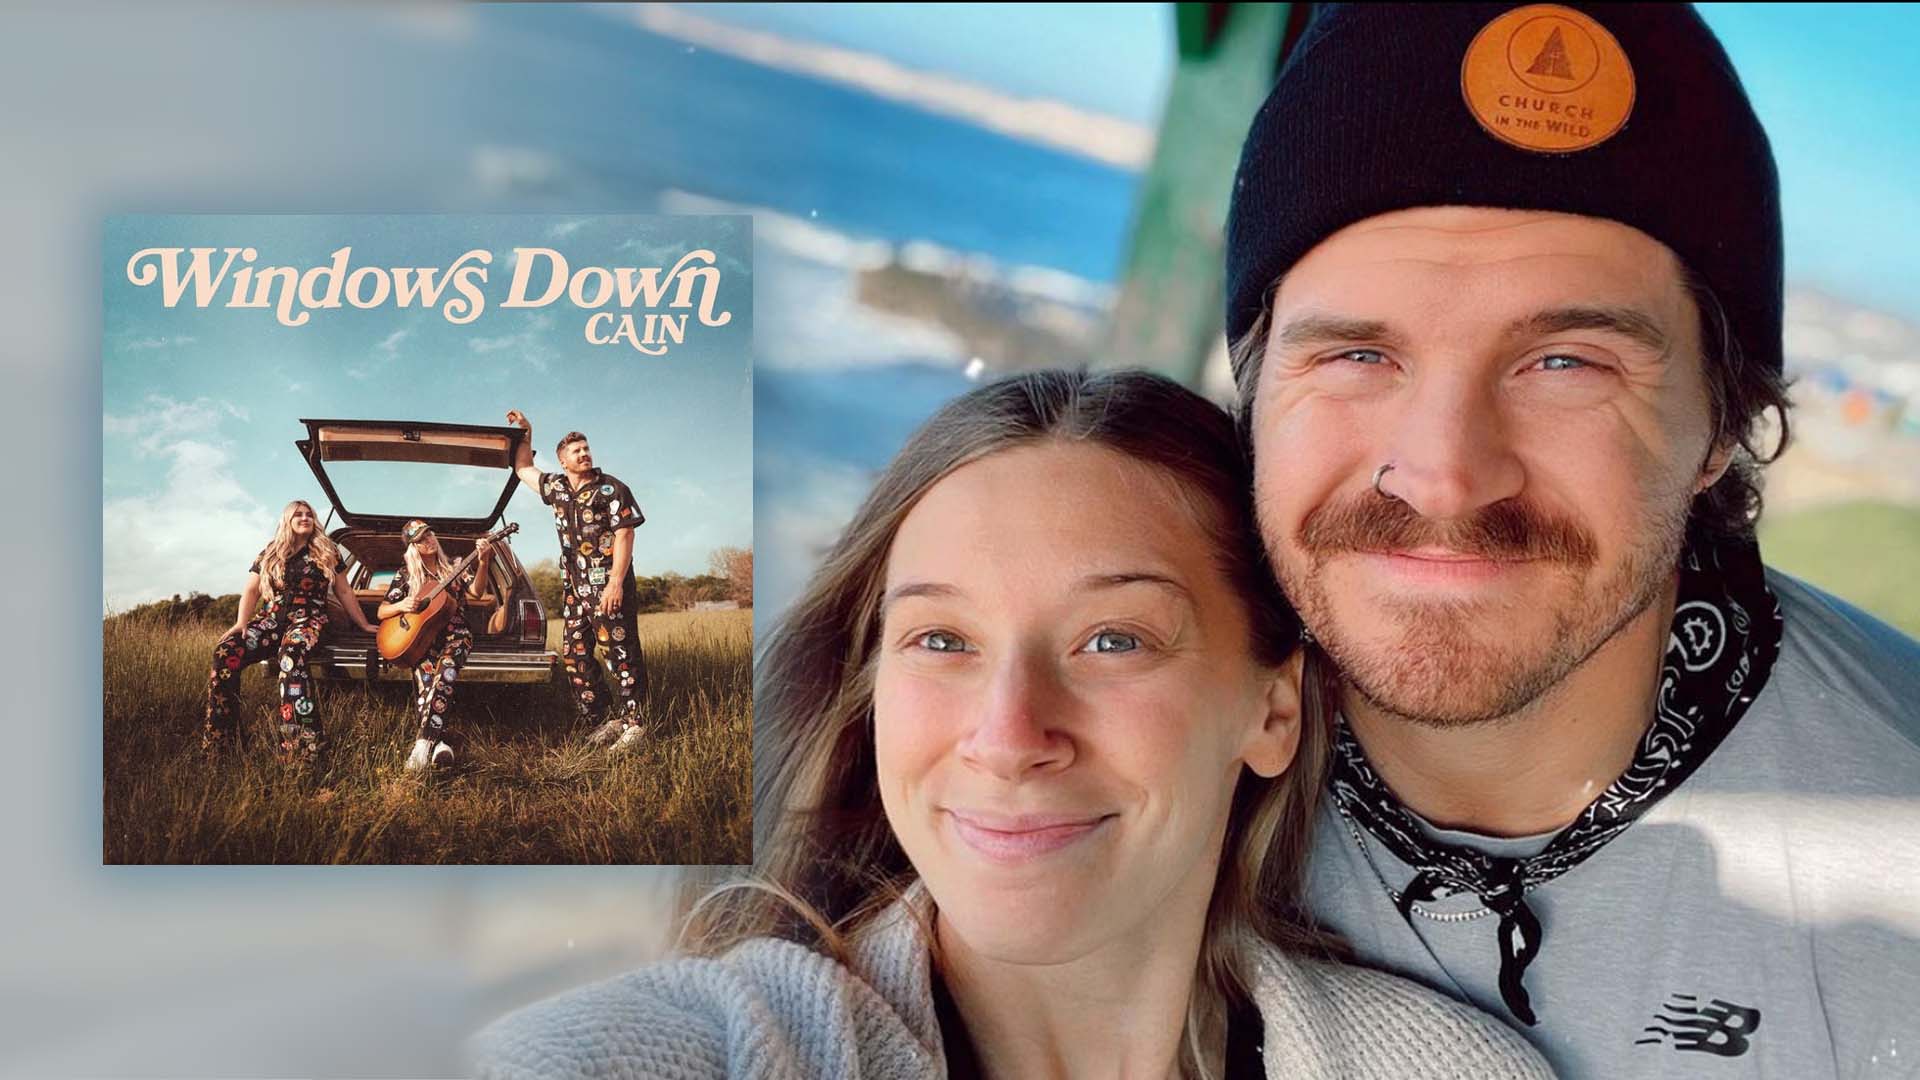 Emily CAIN shares her testimony in CAIN's New Song Windows Down